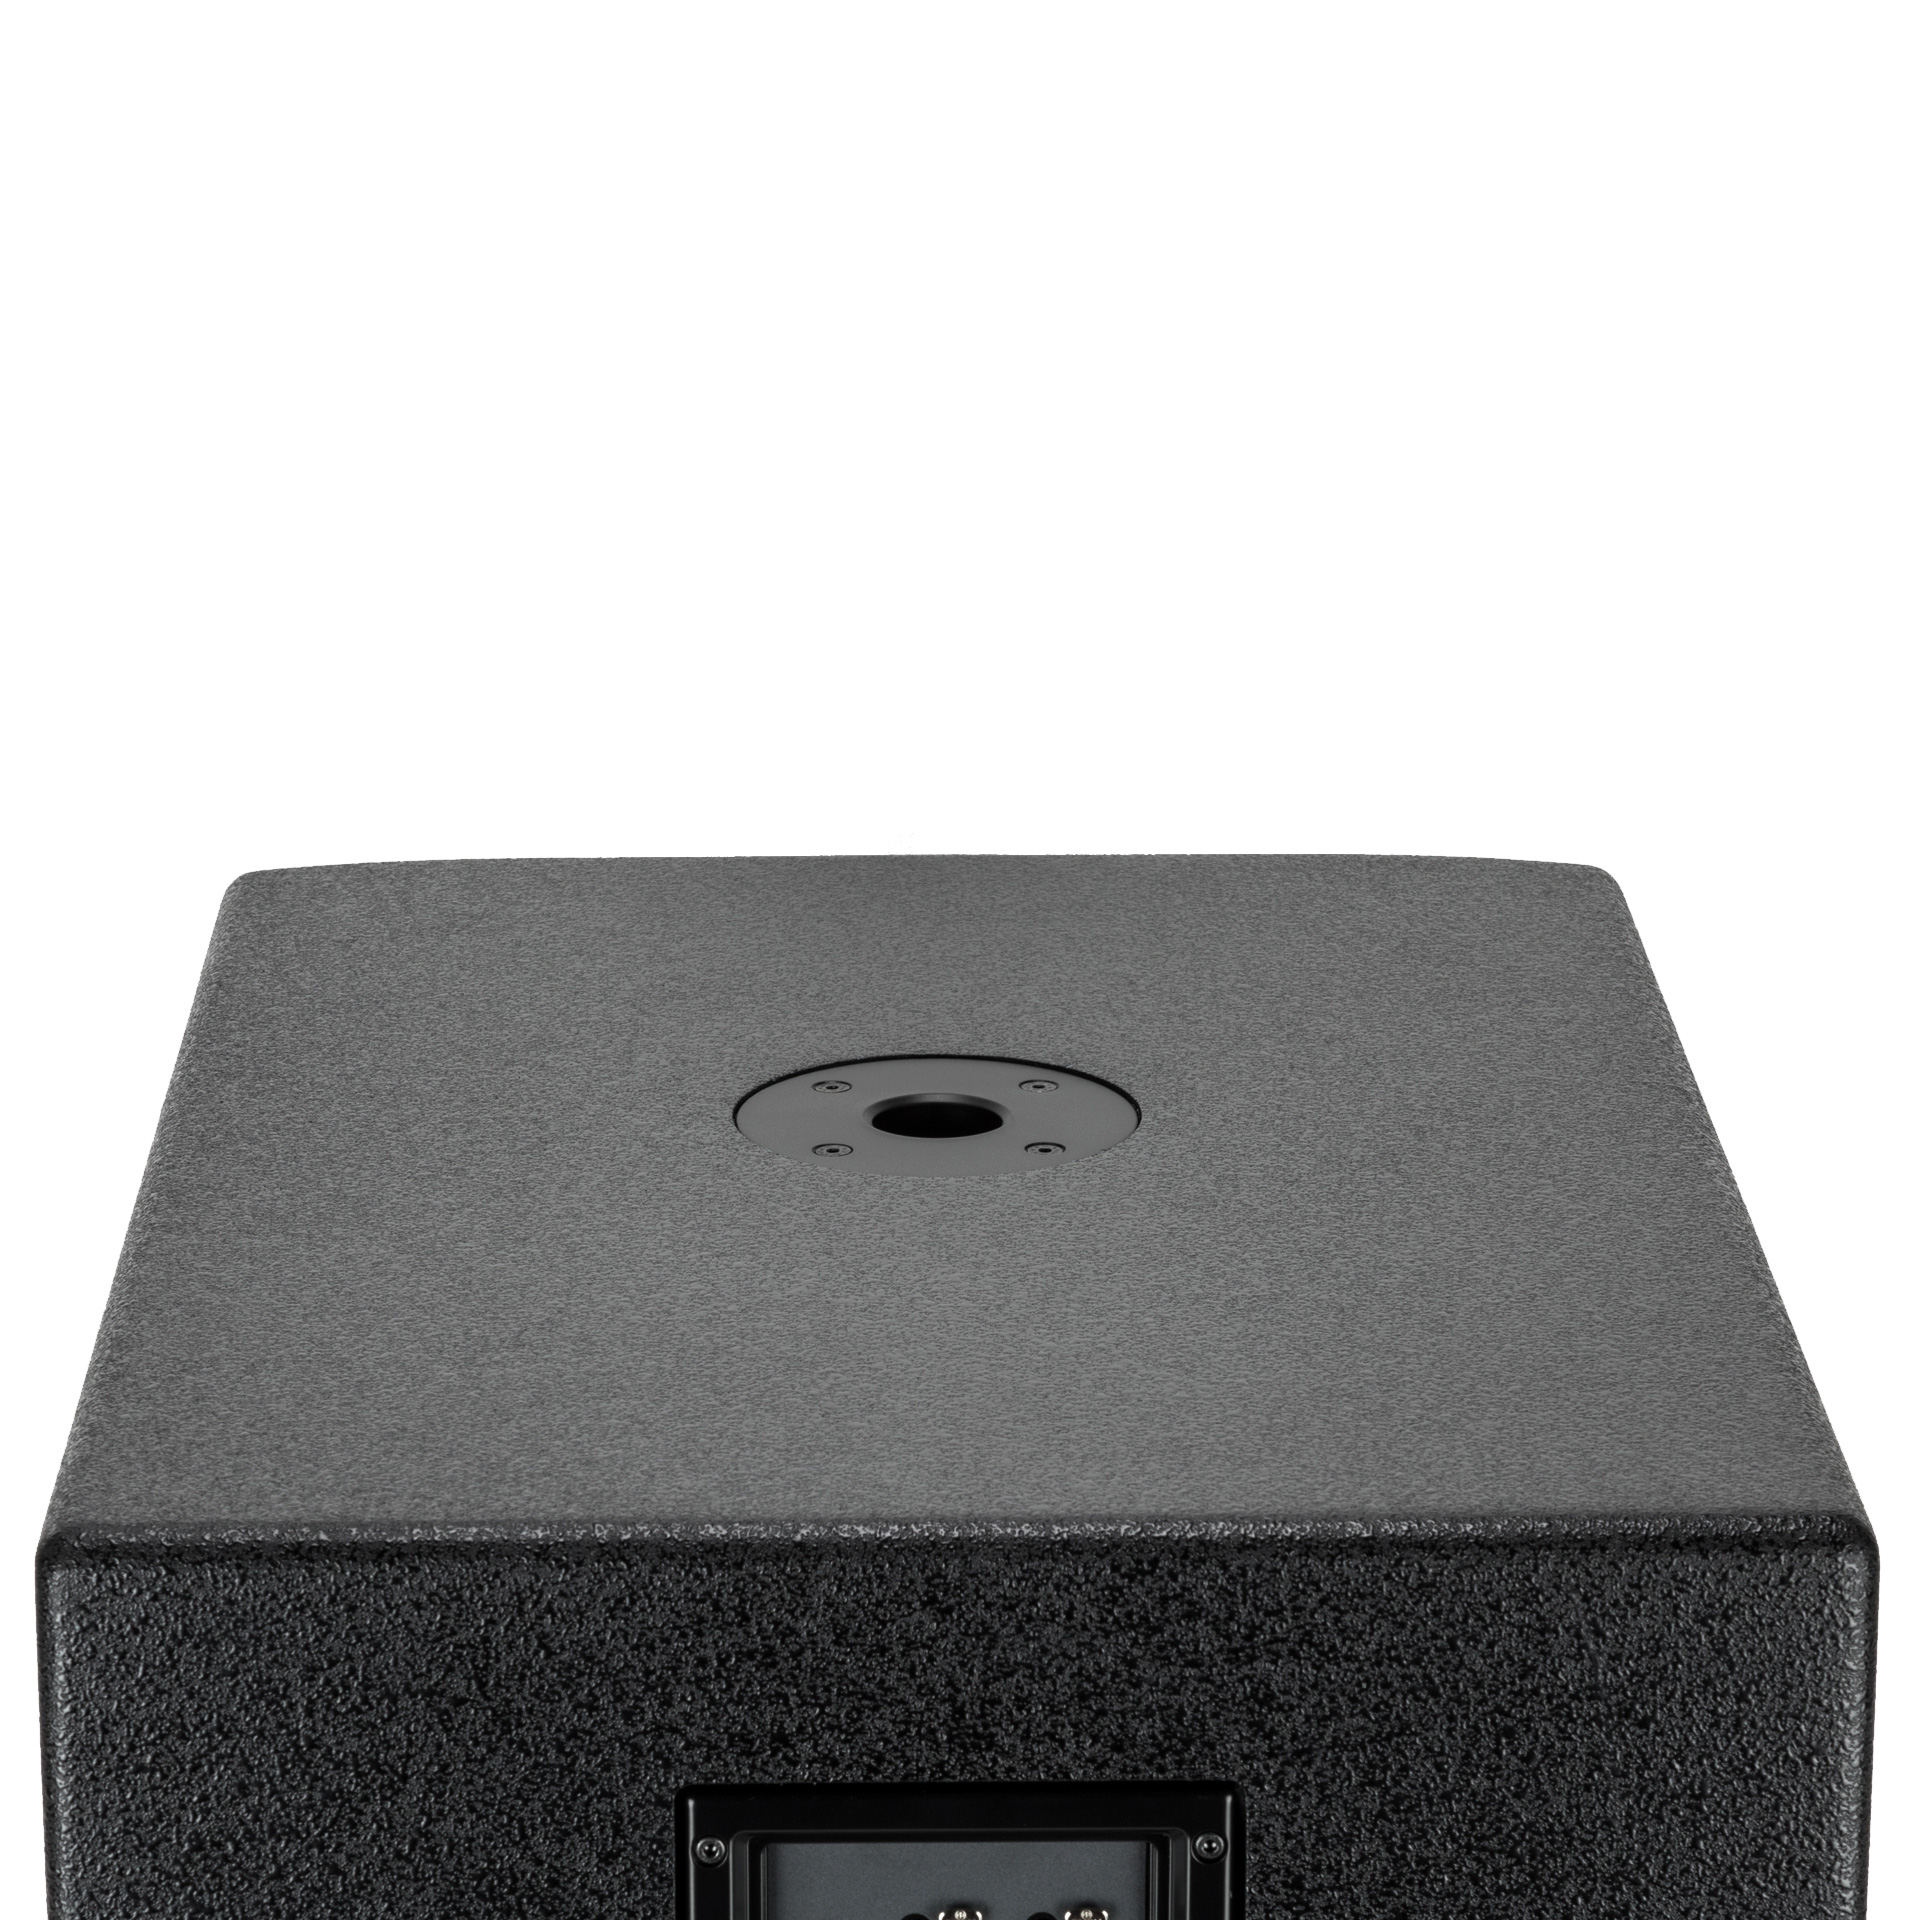 Rcf Sub 705-as Ii - Actieve subwoofer - Variation 3